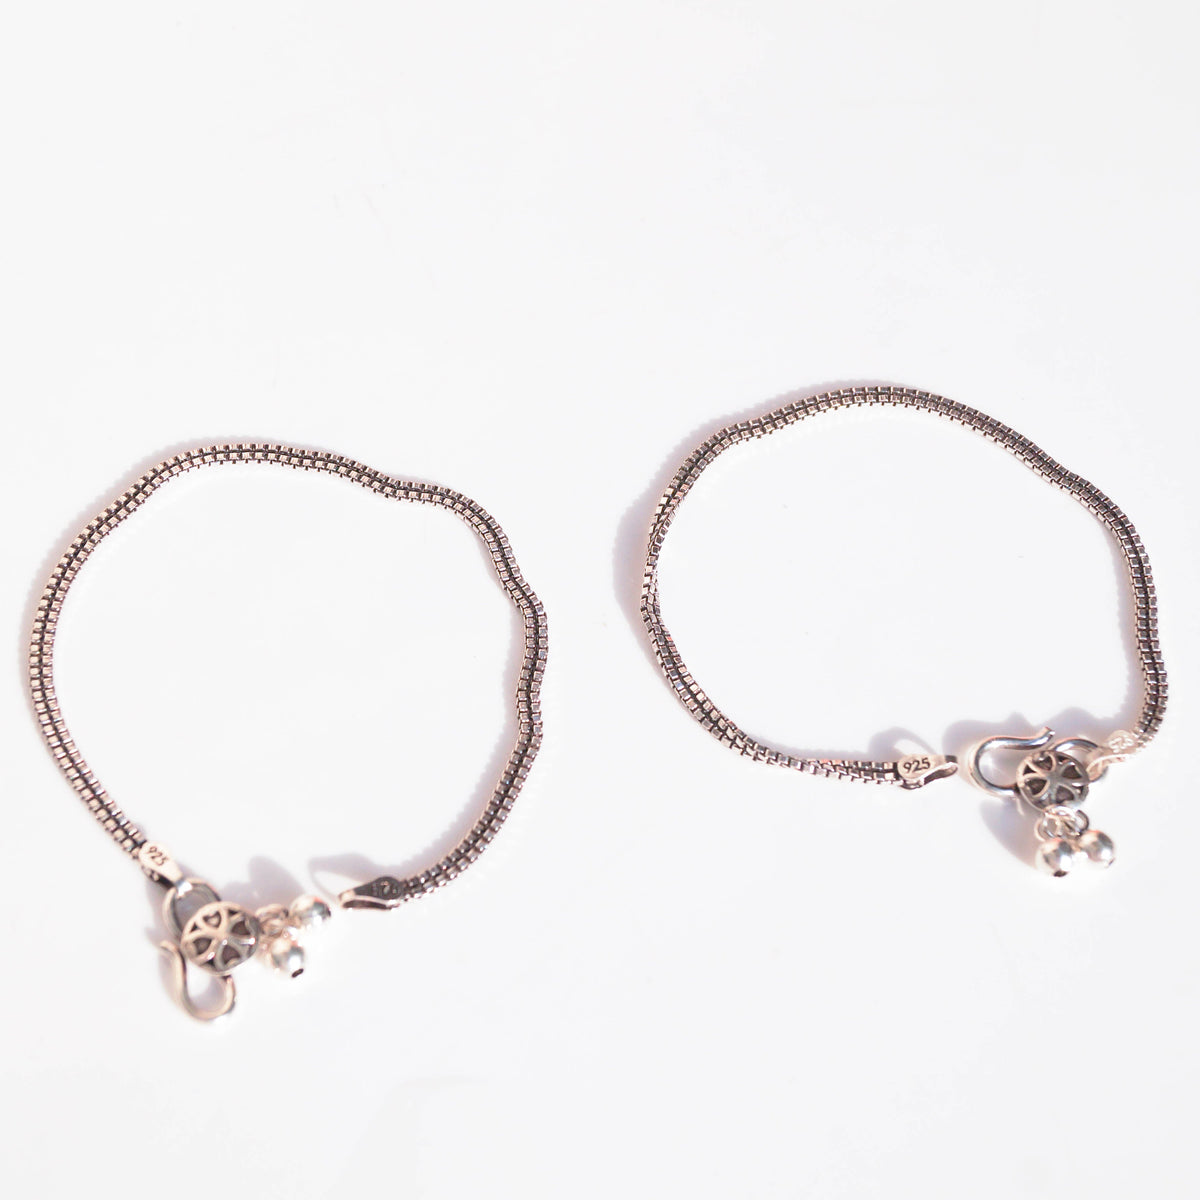 Flattened Chain Kids Anklet (Pair)